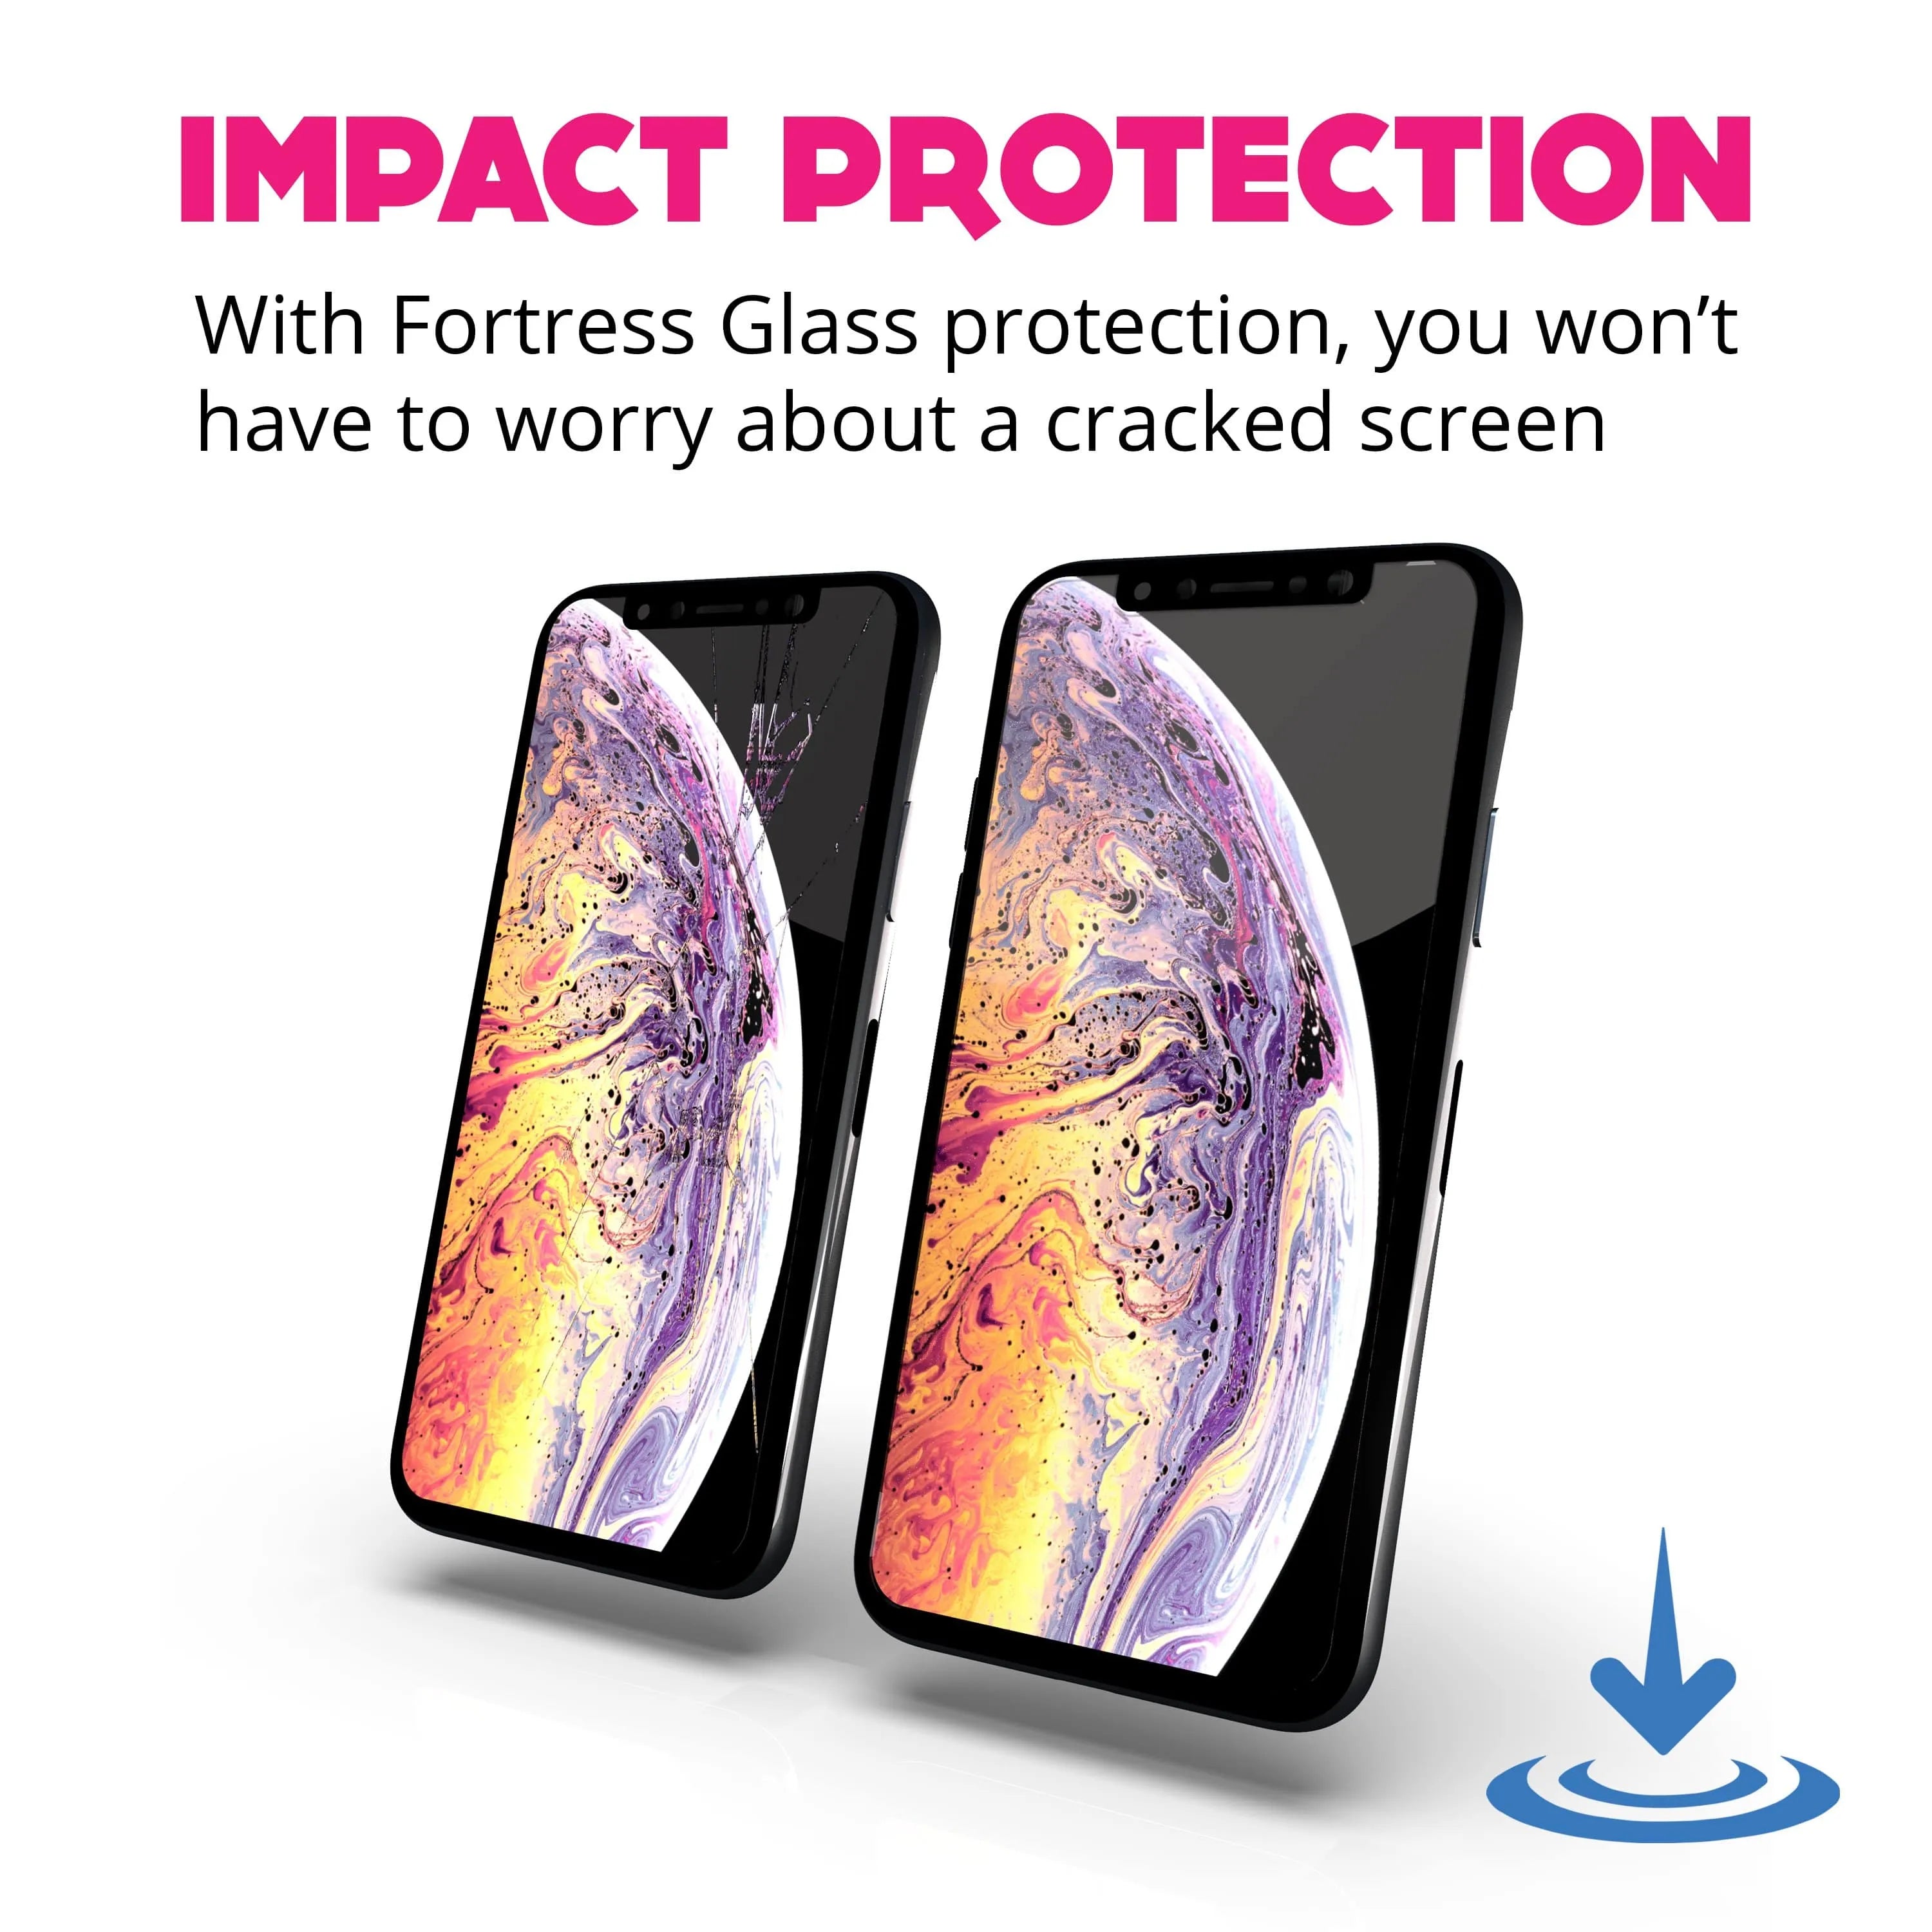 Fortress iPhone XS Max Screen Protector - $200 Device Coverage  Scooch Screen Protector